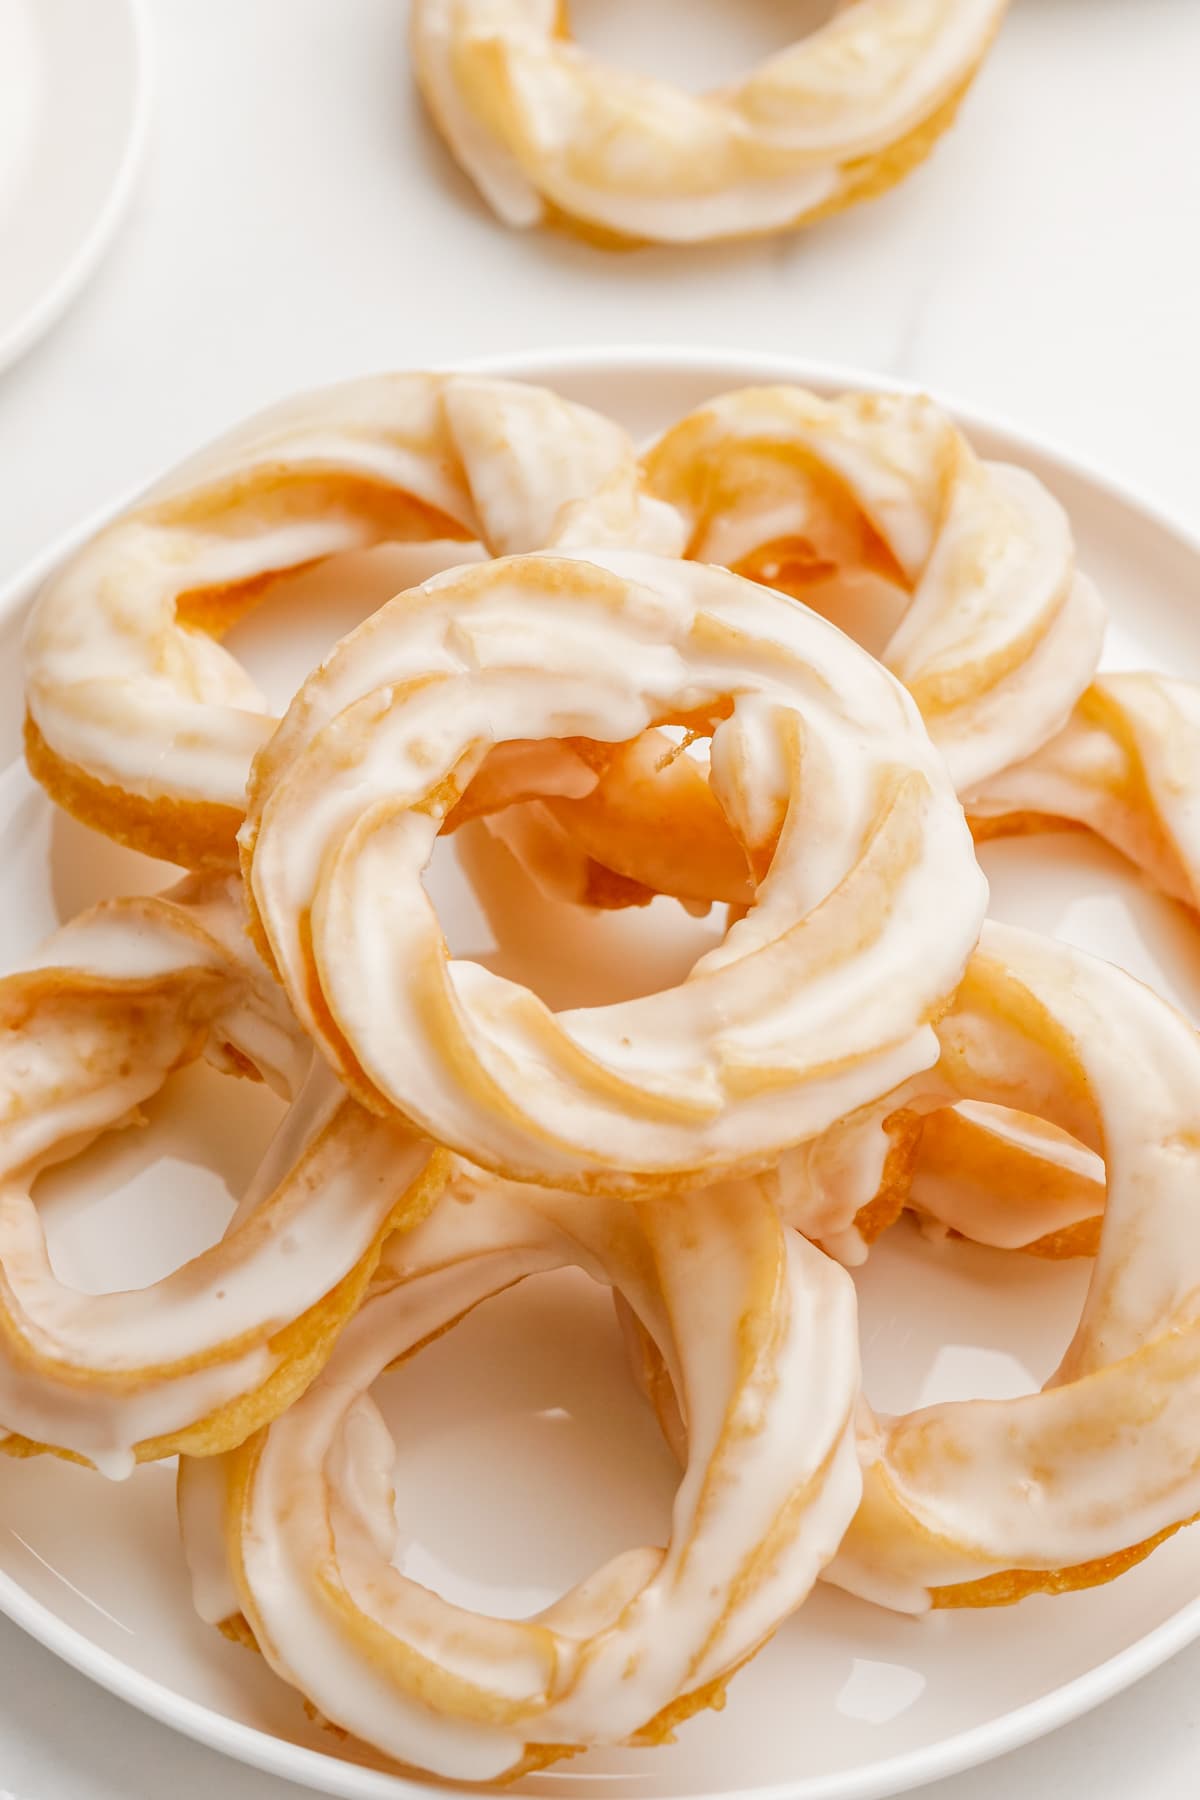 pile of french crullers on plate